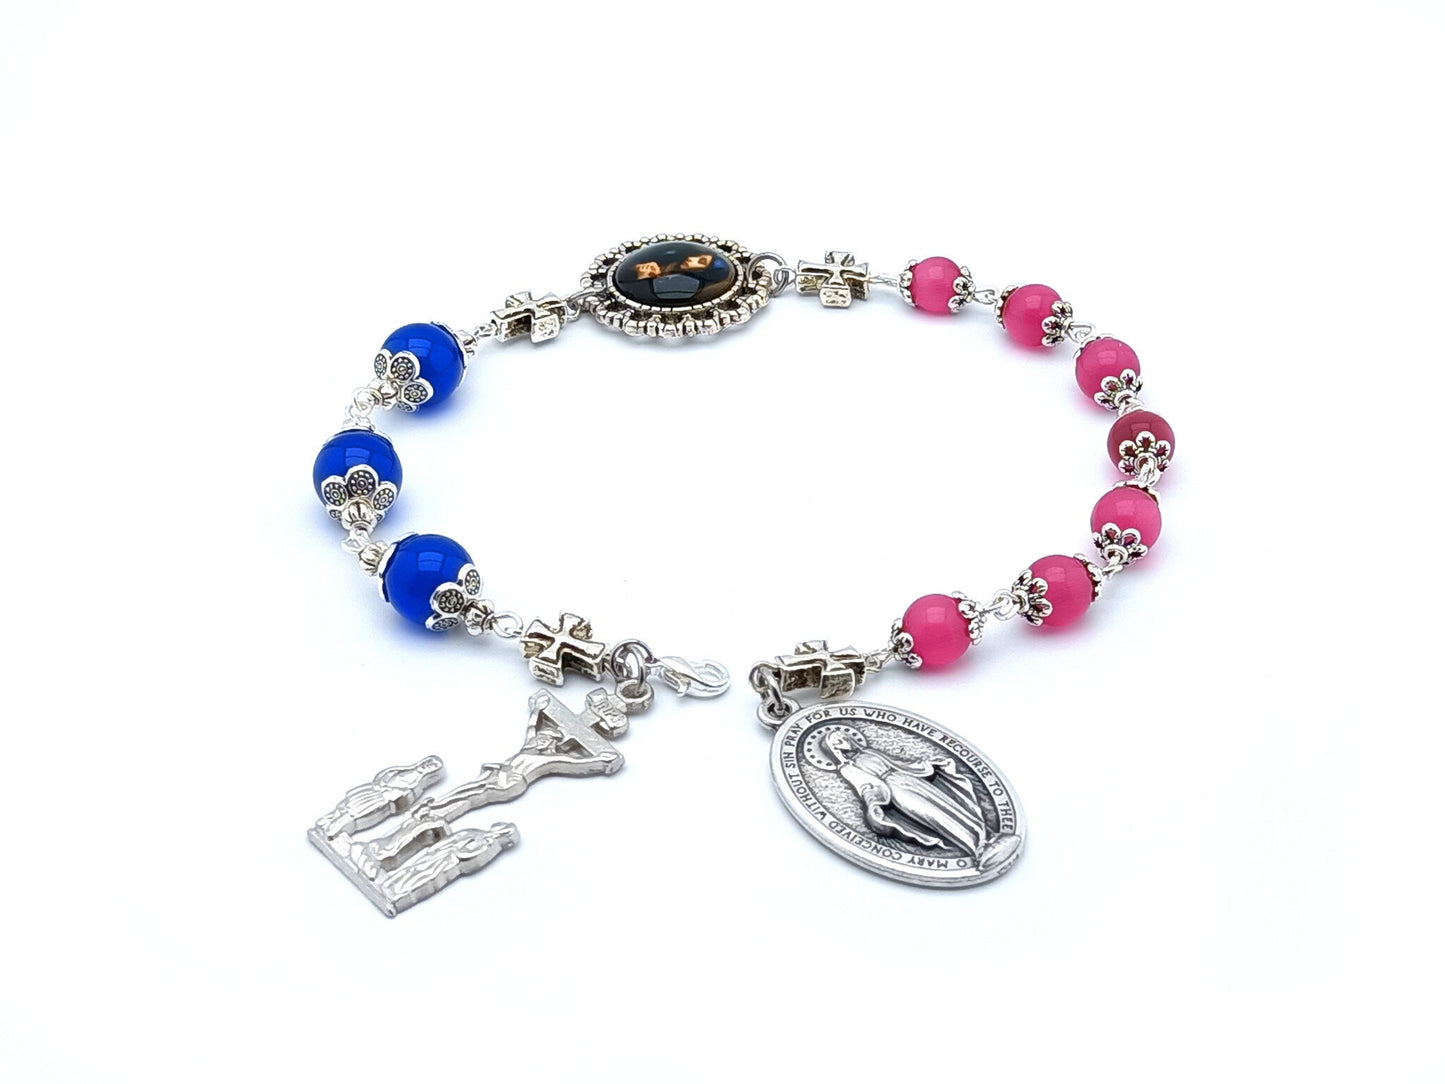 Our Lady of Sorrows unique rosary beads servite prayer chaplet with pink and blue glass beads, silver crucifix and medals.